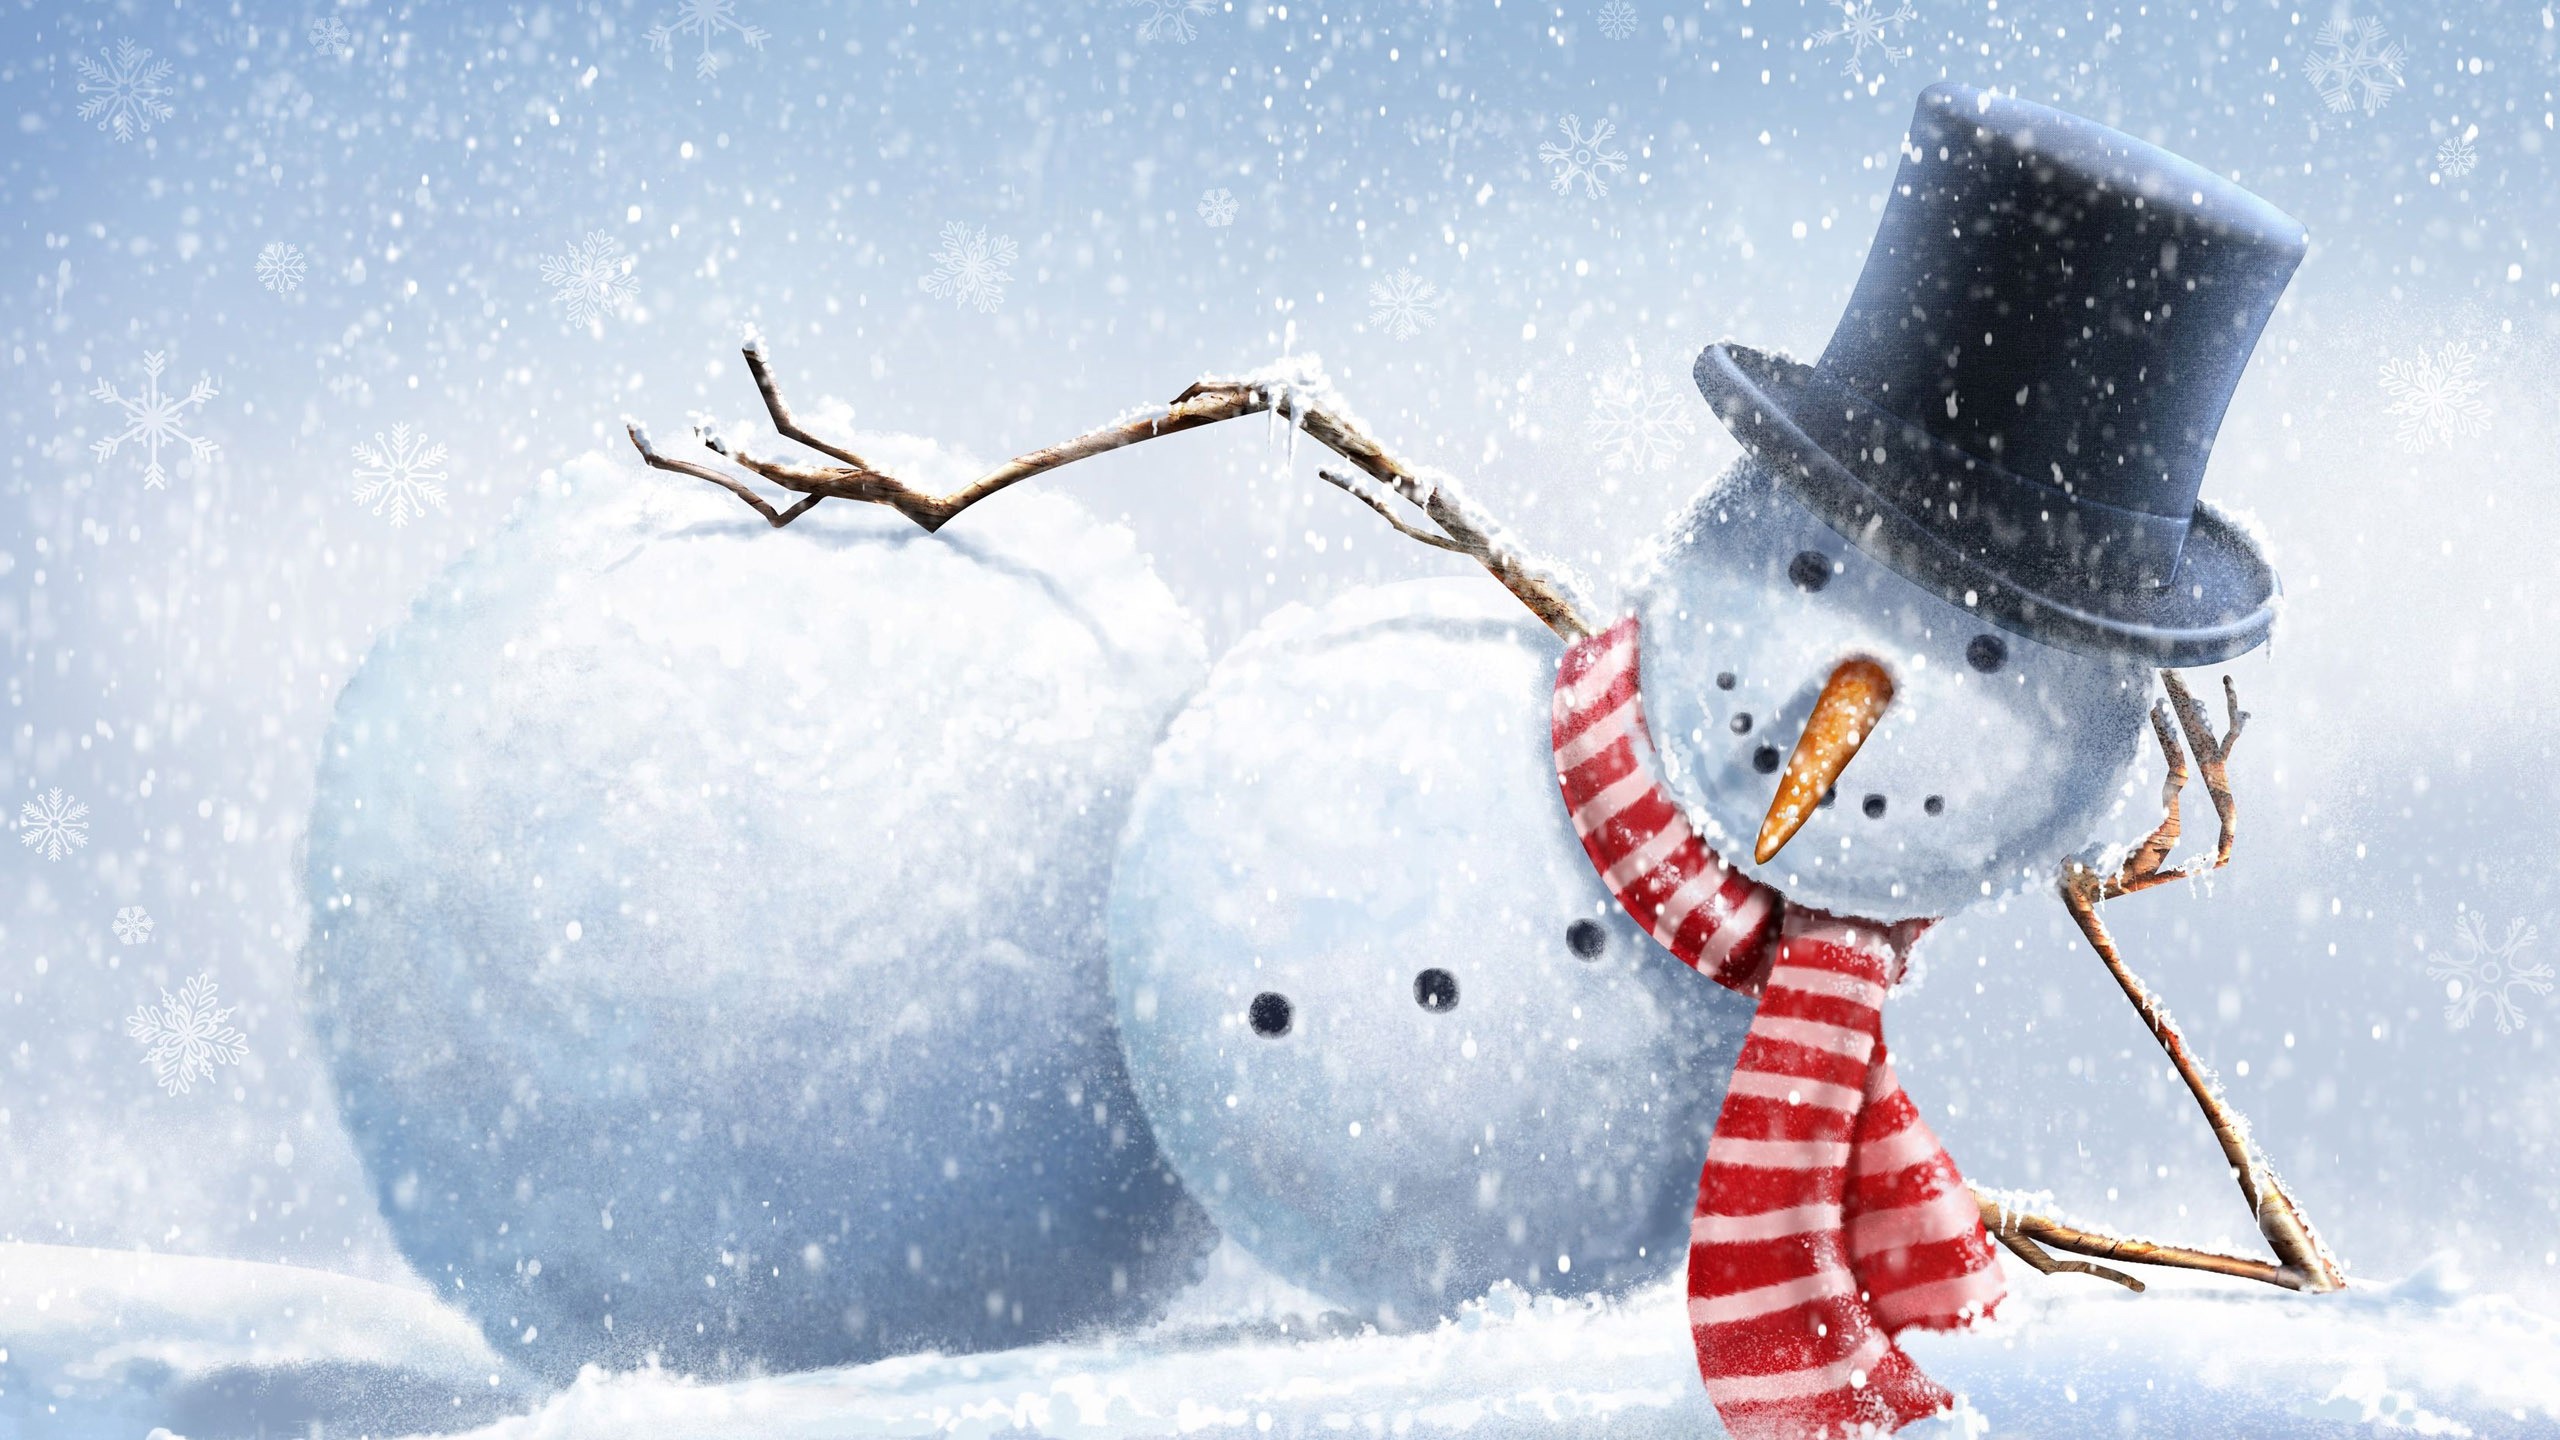 drawing snow winter snowman top hats branch carrots snowflakes Wallpaper